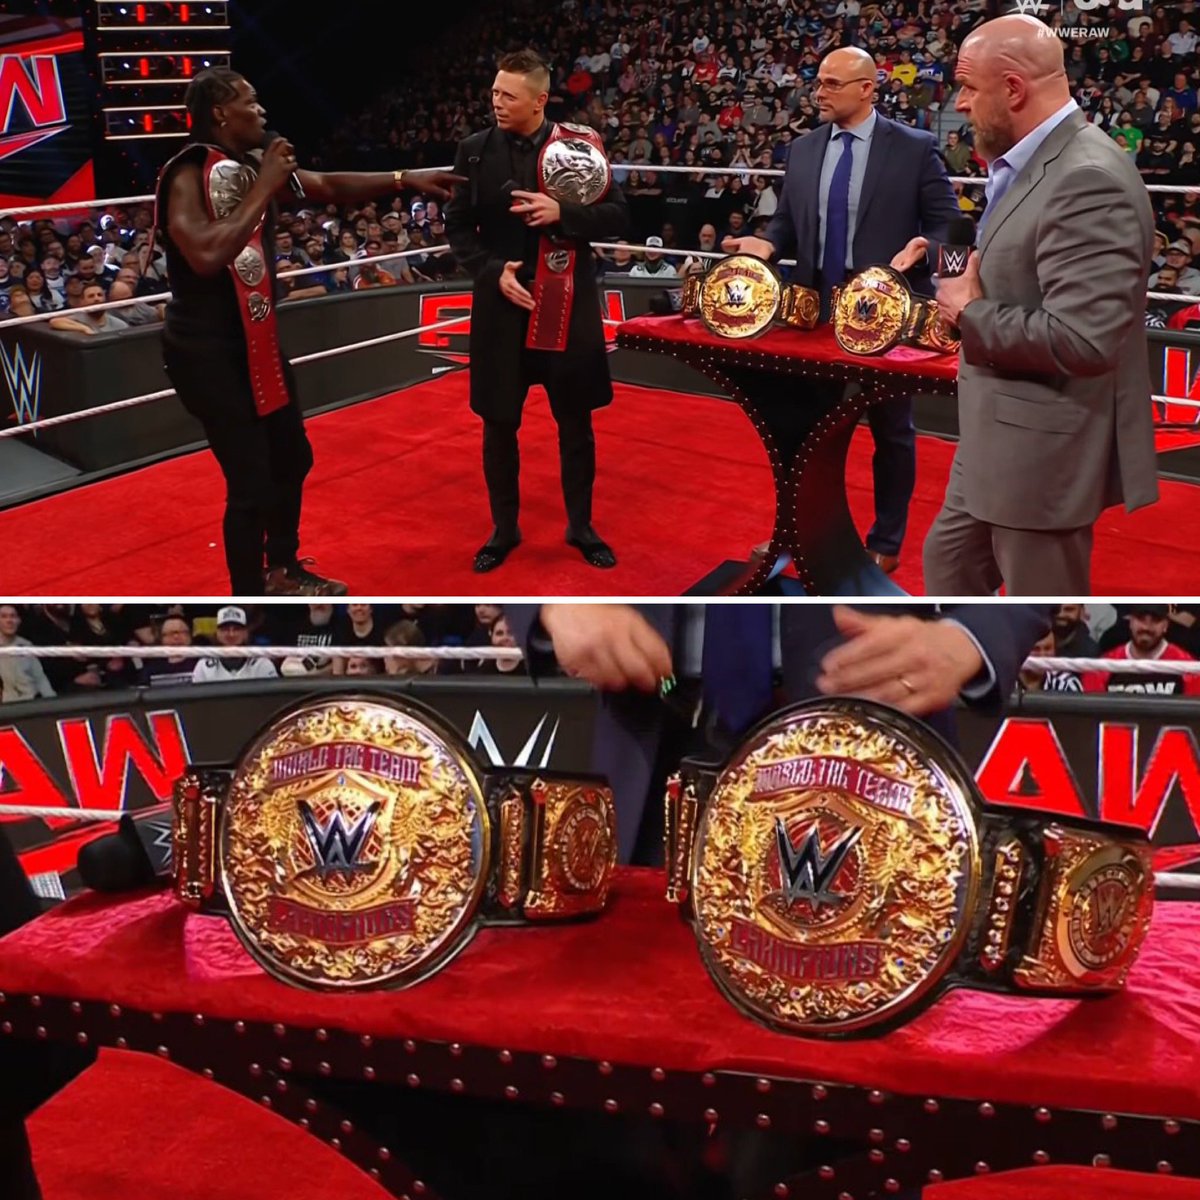 Triple H Presented The Brand New World Tag Team Titles For AWESOME TRUTH. #WWE #WWERAW